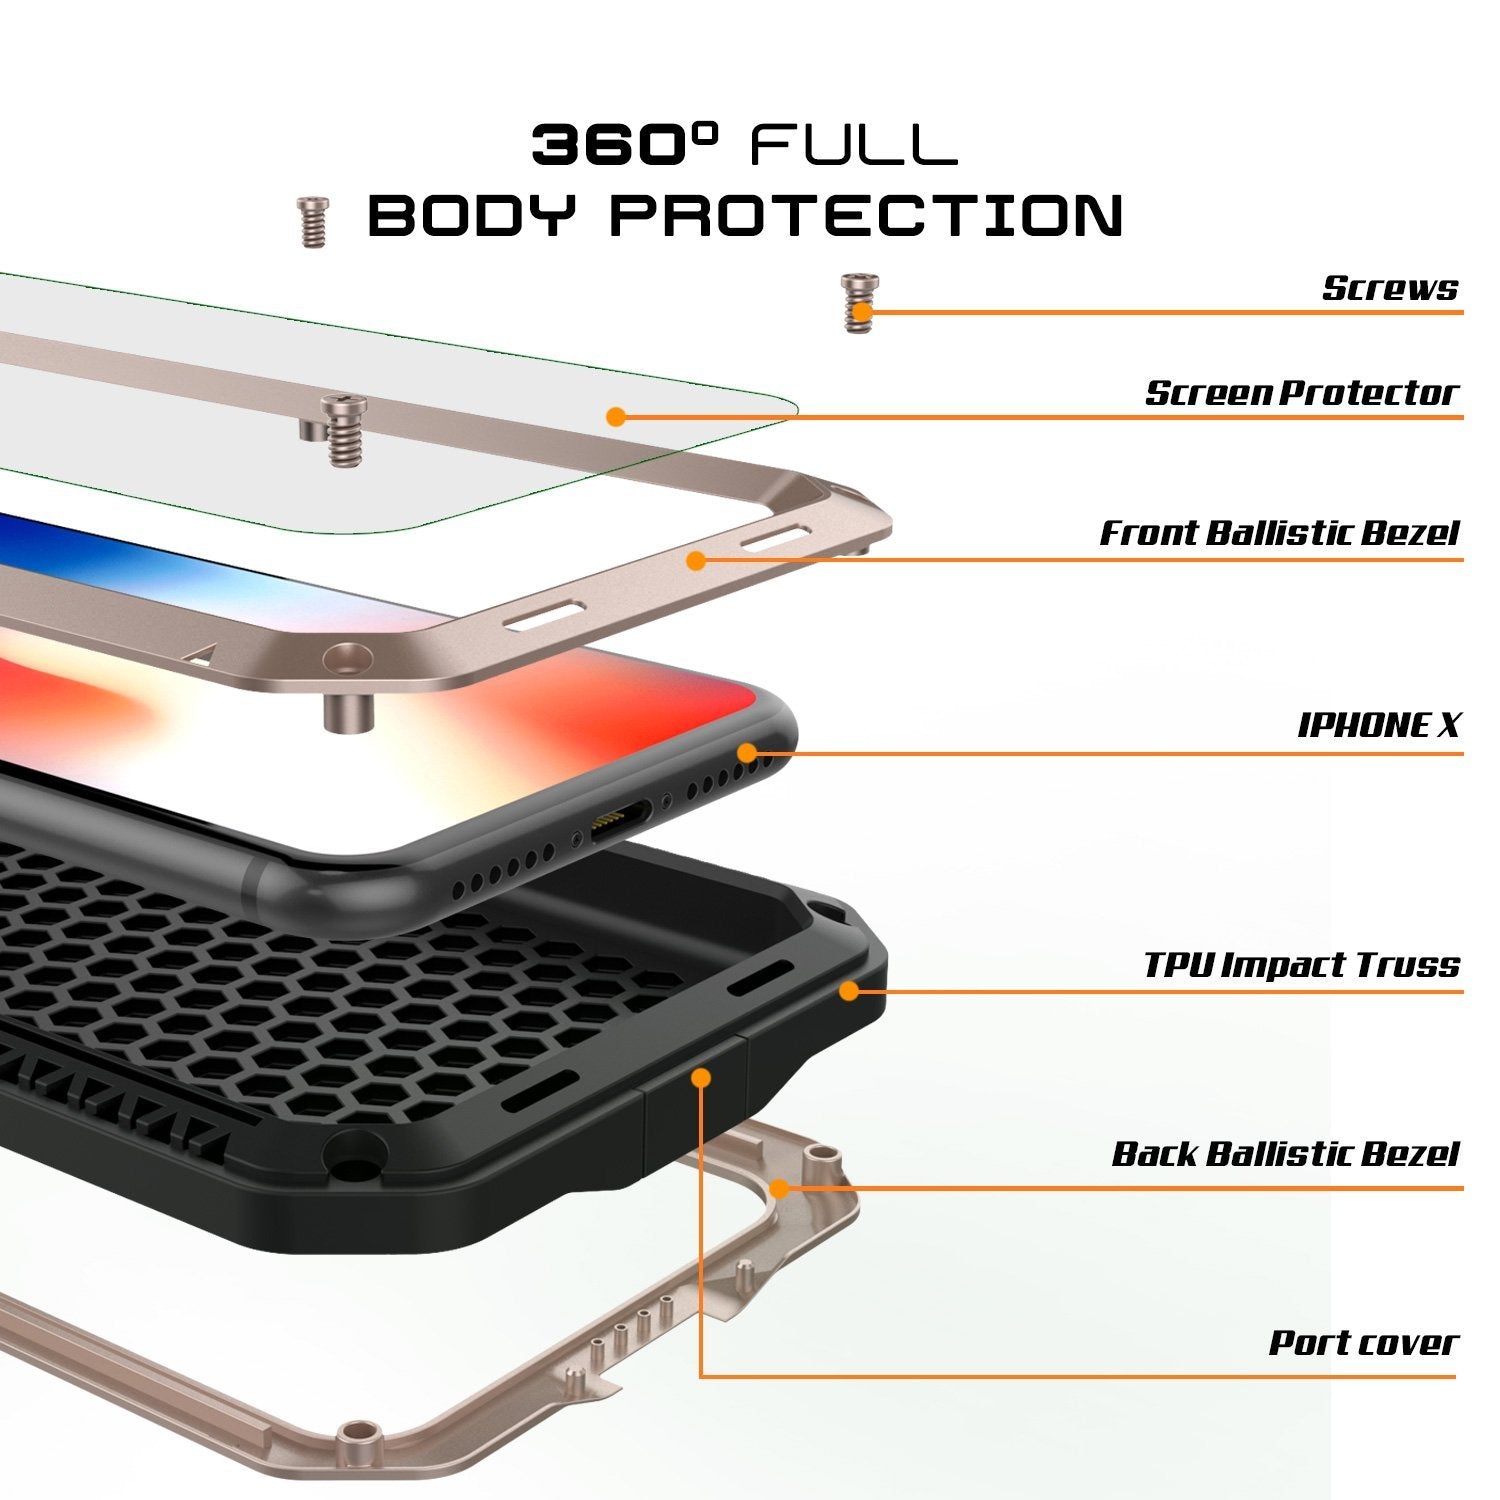 iPhone XS Max Metal Case, Heavy Duty Military Grade Armor Cover [shock proof] Full Body Hard [Gold]